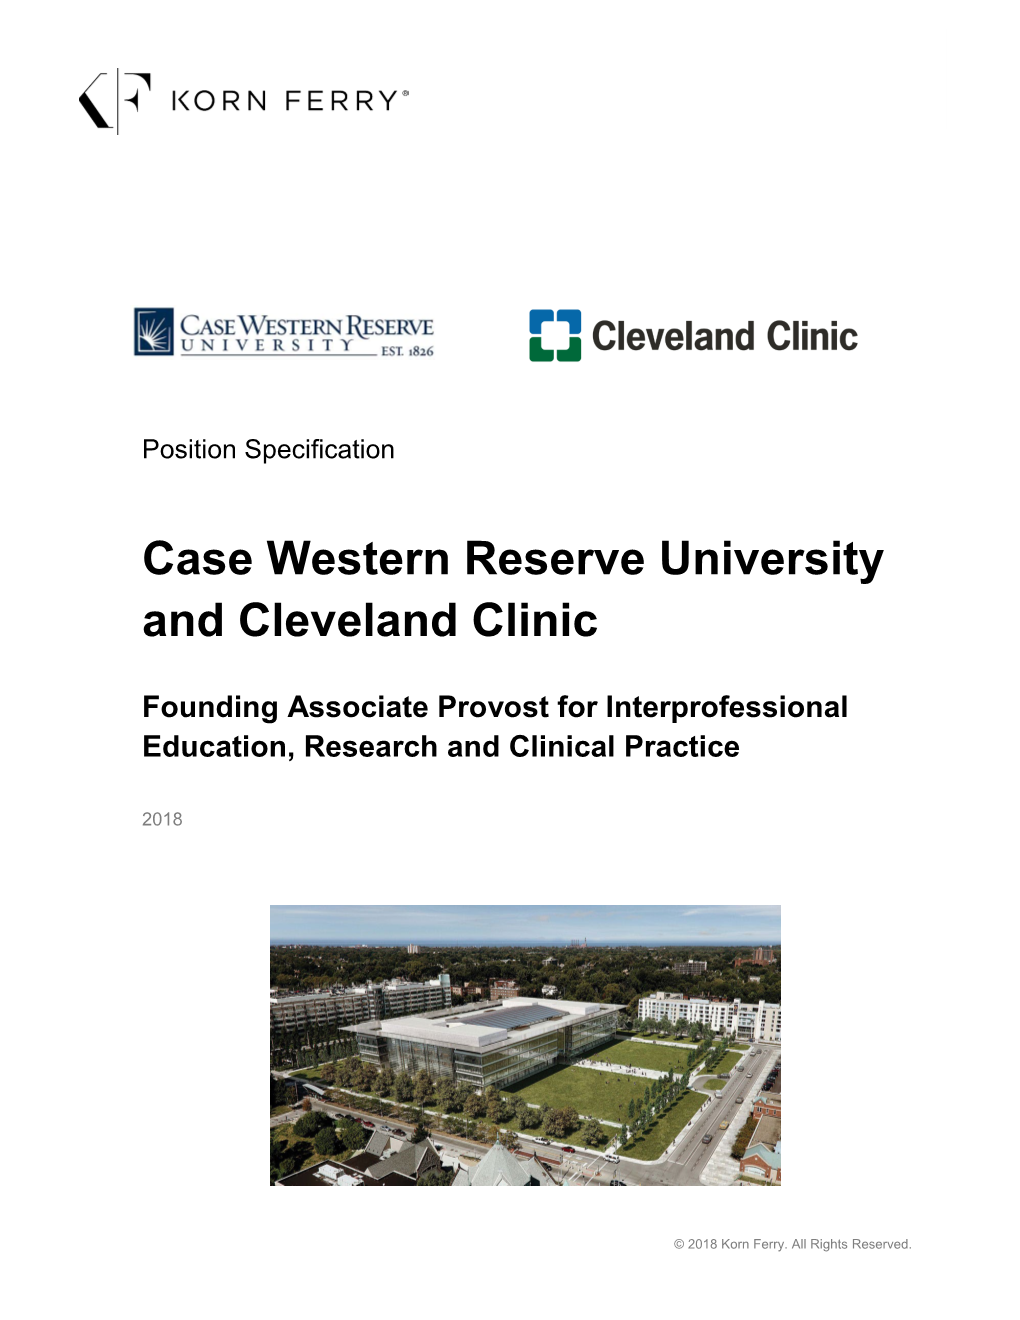 Case Western Reserve University and Cleveland Clinic